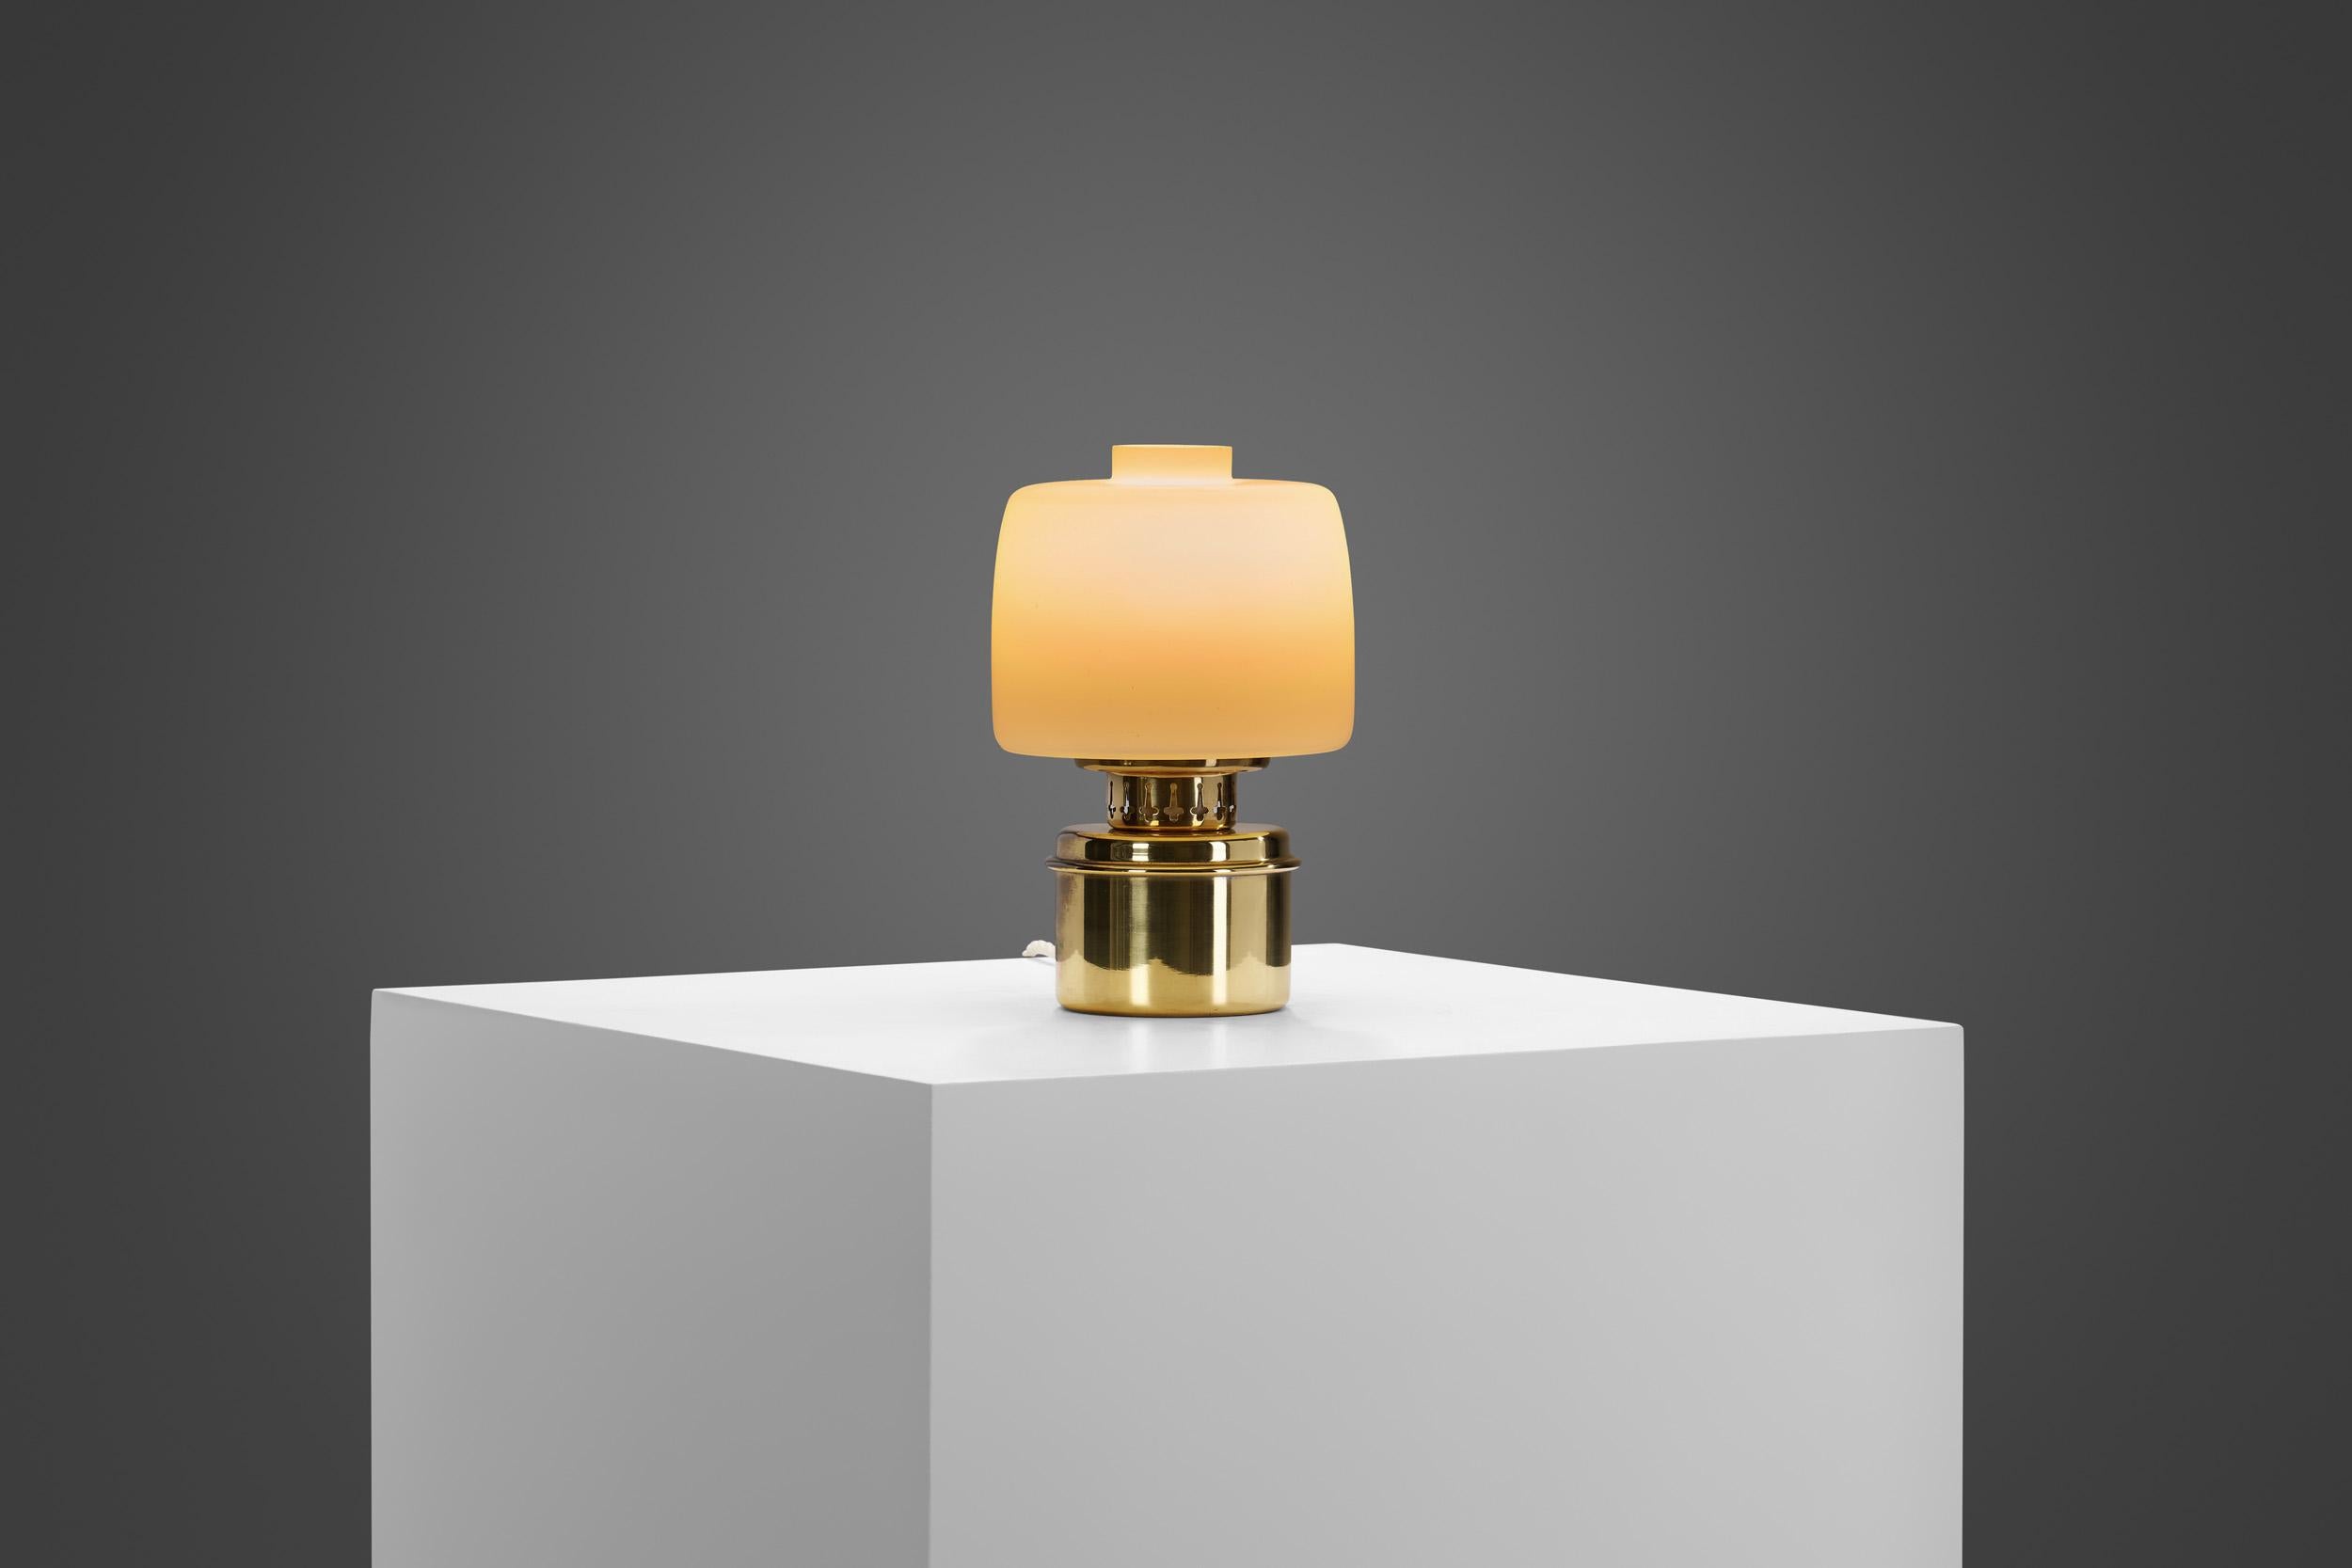 Based on the classic oil lamp, this model “B255” table lamp is a lovely design combining traditional and modern lighting design. The design is therefore derivative of a traditional aesthetic with a modern sensibility, mixed with an extensive use of